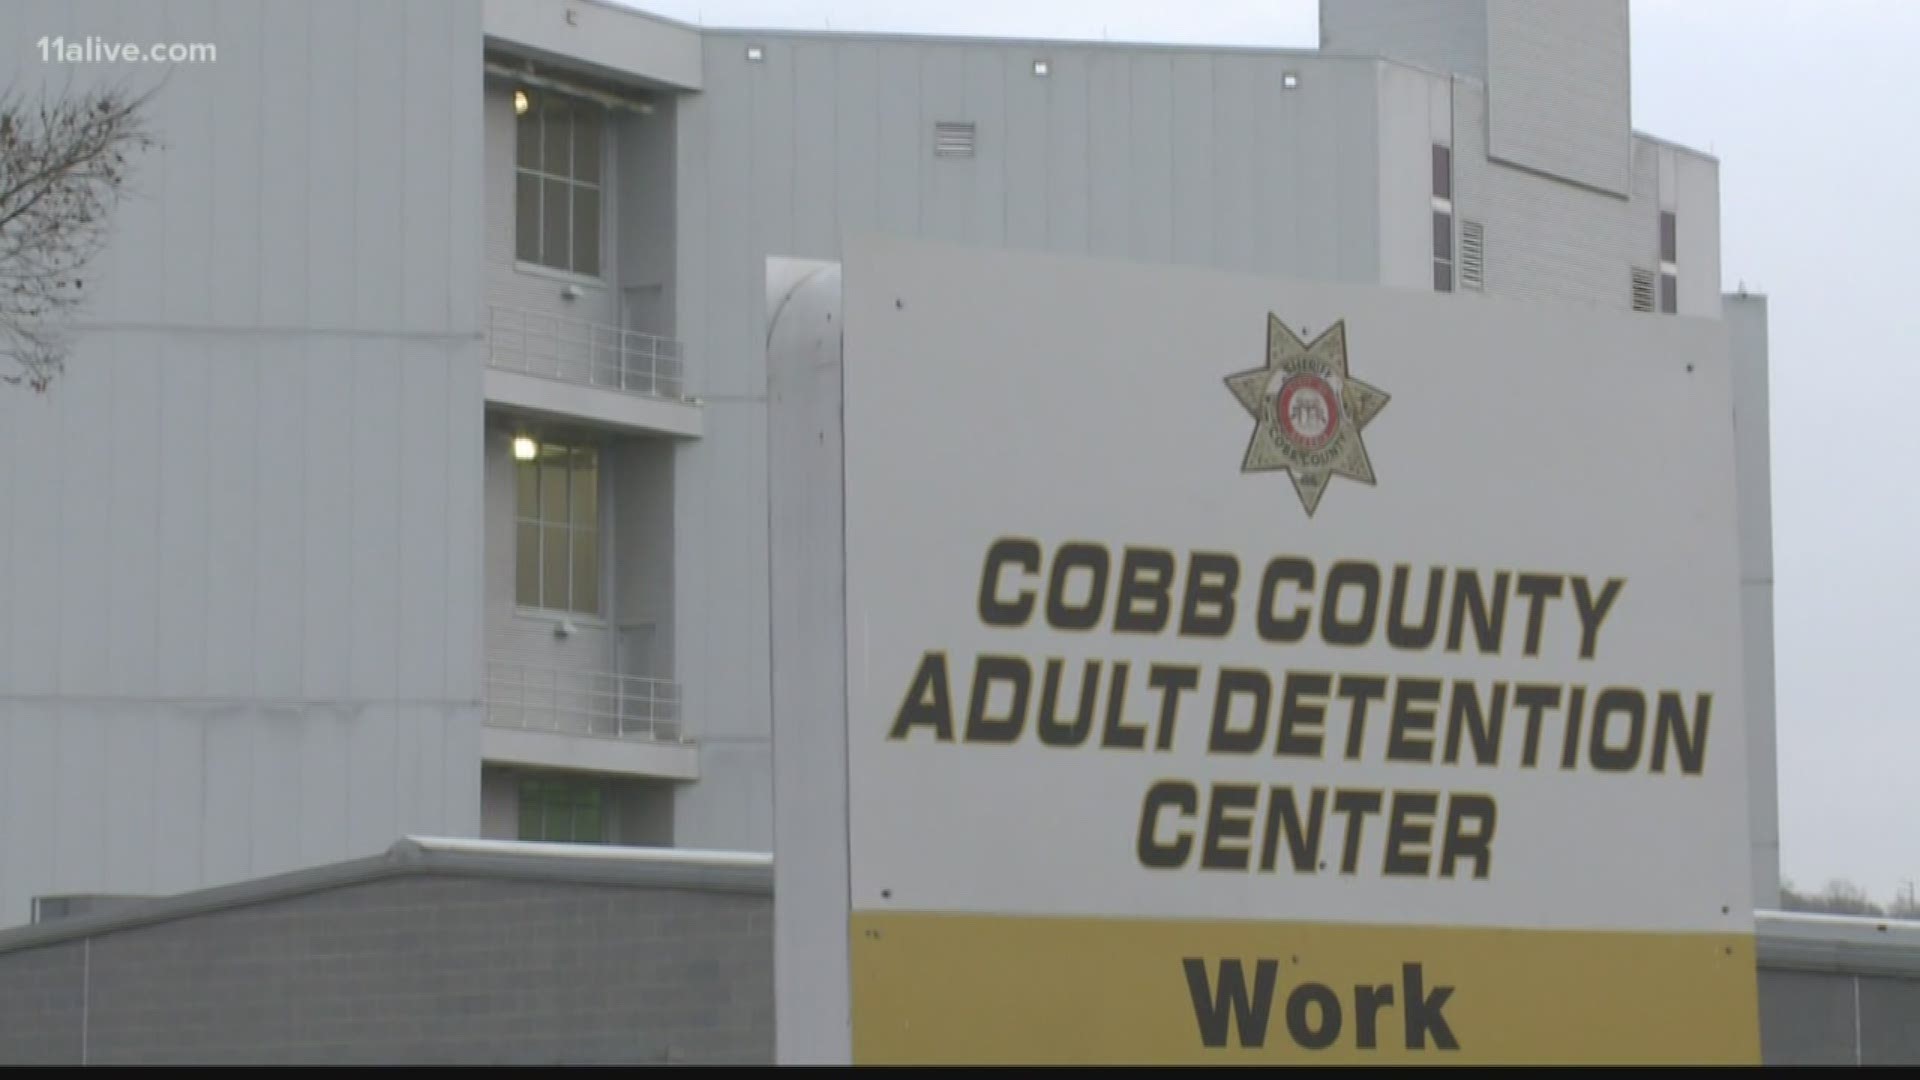 Cobb County Sheriff Neil Warren says it was because of a plumbing repair and the jail plans to test the water. In a statement, he said the ACLU is turning a minor pl